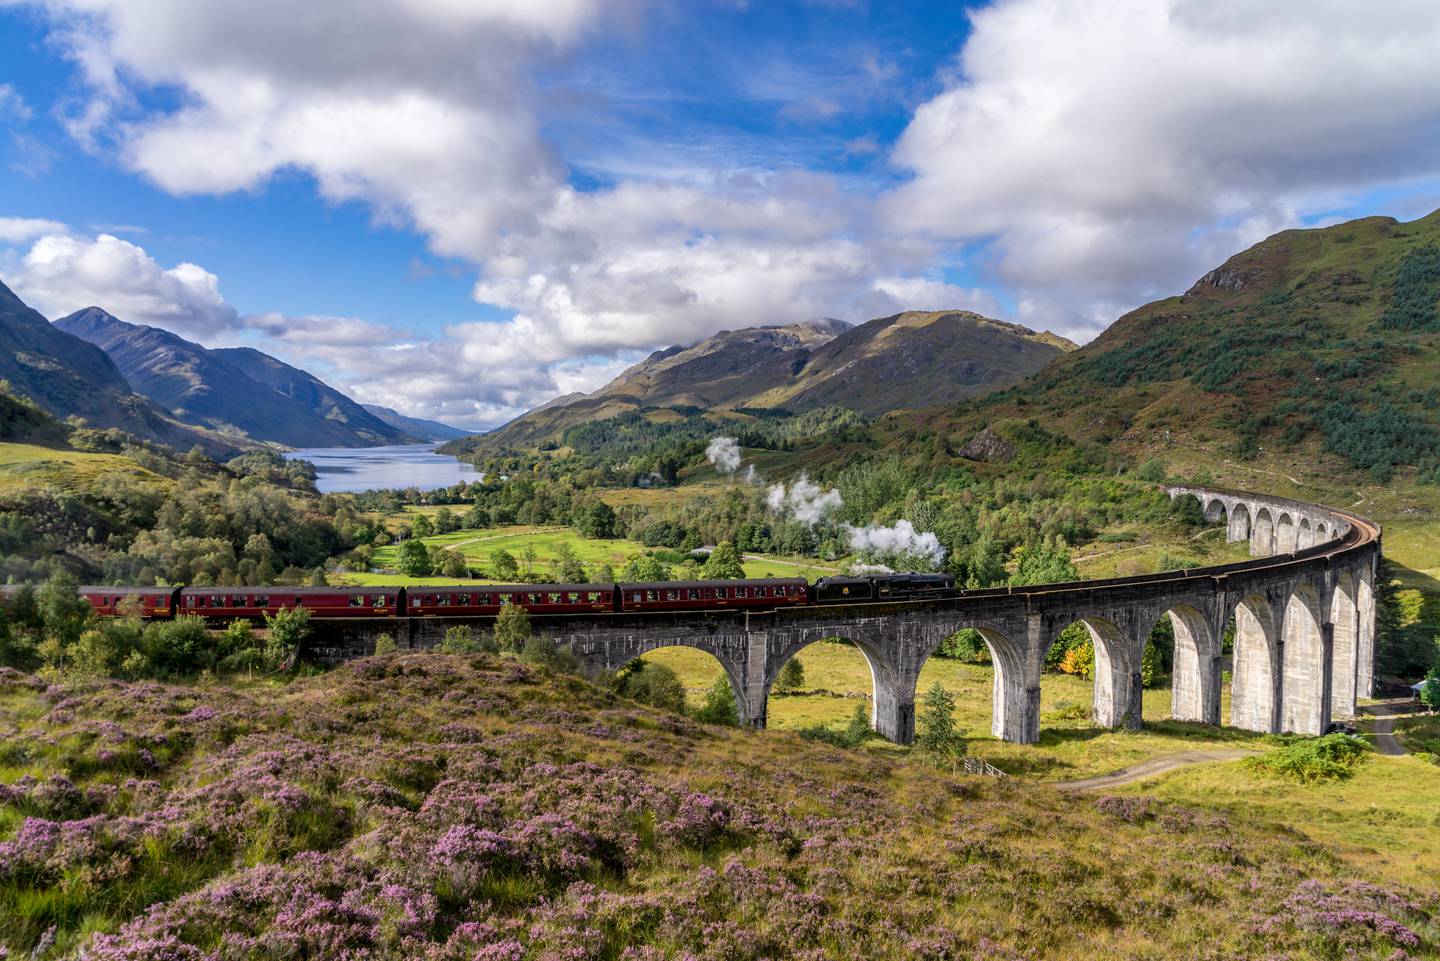 The famed Glenfinnan Railway Viaduct in Scotland, which featured in the Harry Potter films. Getty